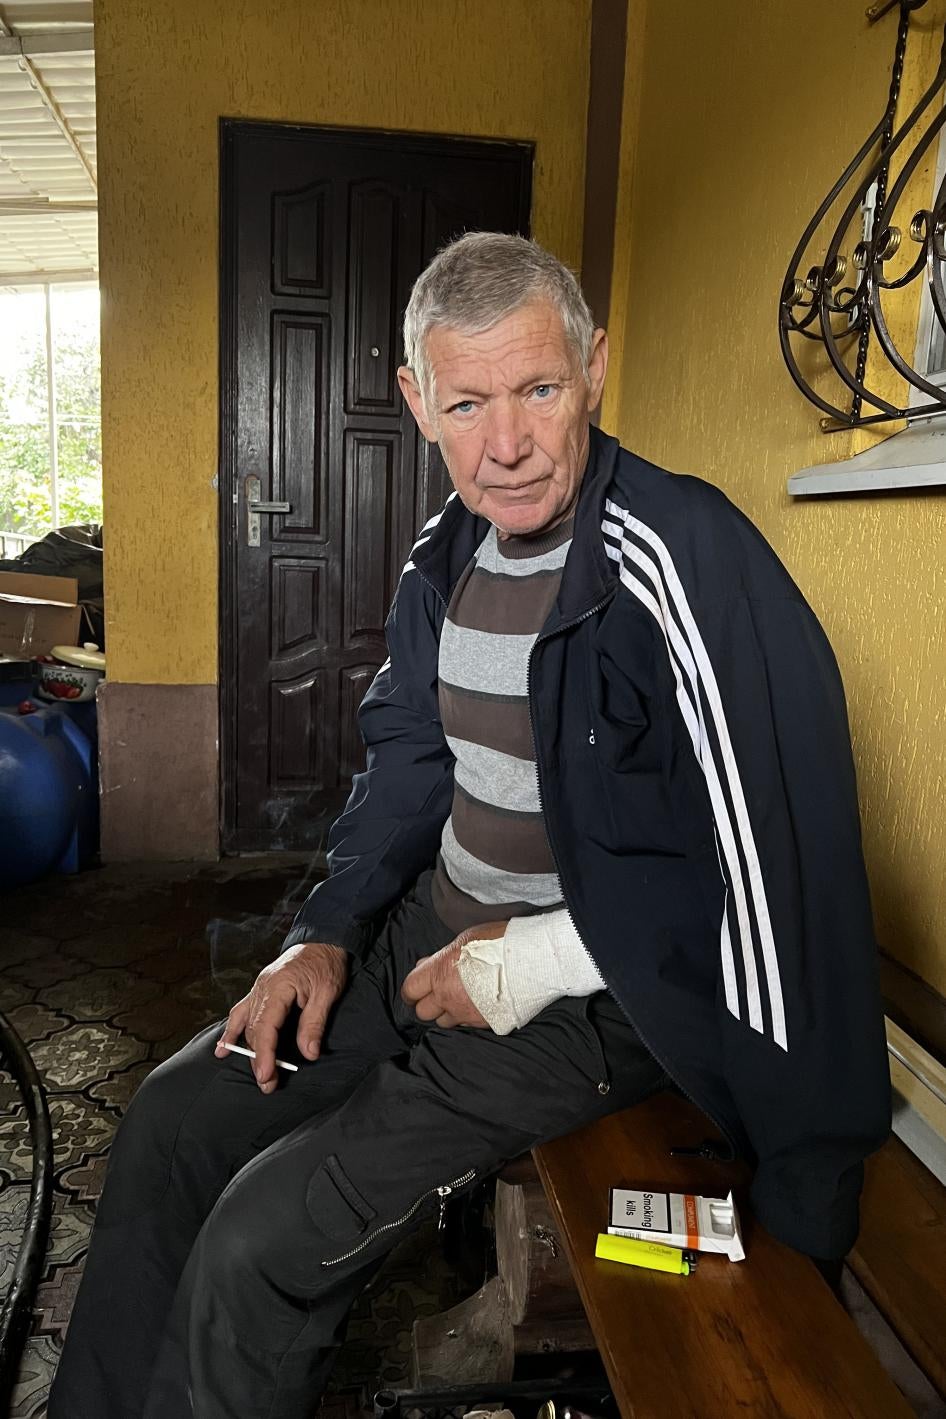 Mykhailo Ivanovych, 67, who was detained in late August 2022 for 12 days. A soldier broke his left arm when he hit him with what Mykhailo Ivanovych thought was a plastic pipe, Izium, Ukraine, September 23, 2022.